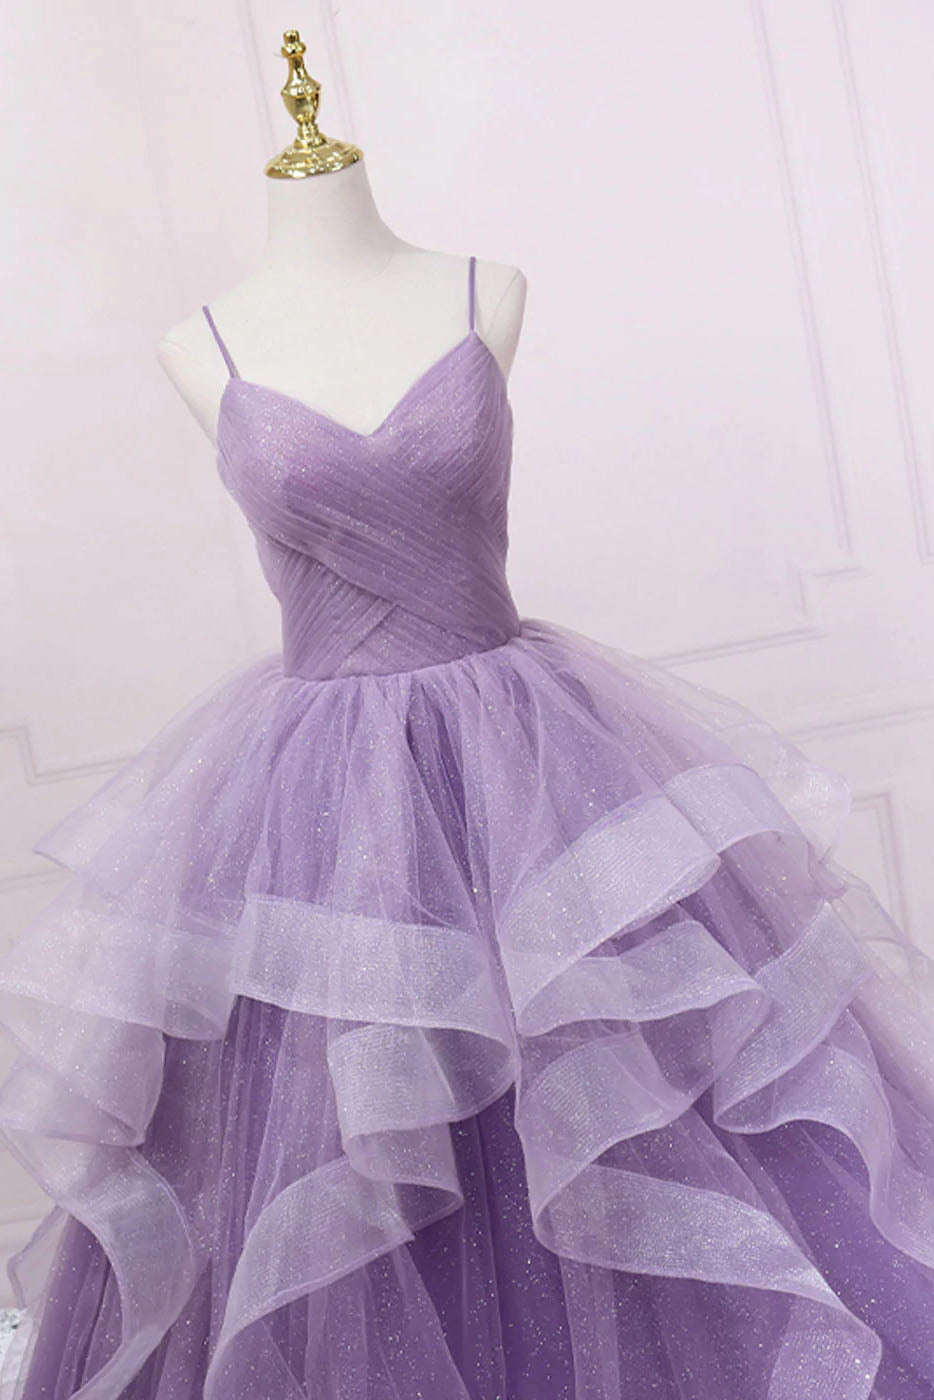 Formal Dresses Homecoming, Princess Lavender Sparkly Spaghetti Straps Long Prom Dress Floor Length Evening Gown